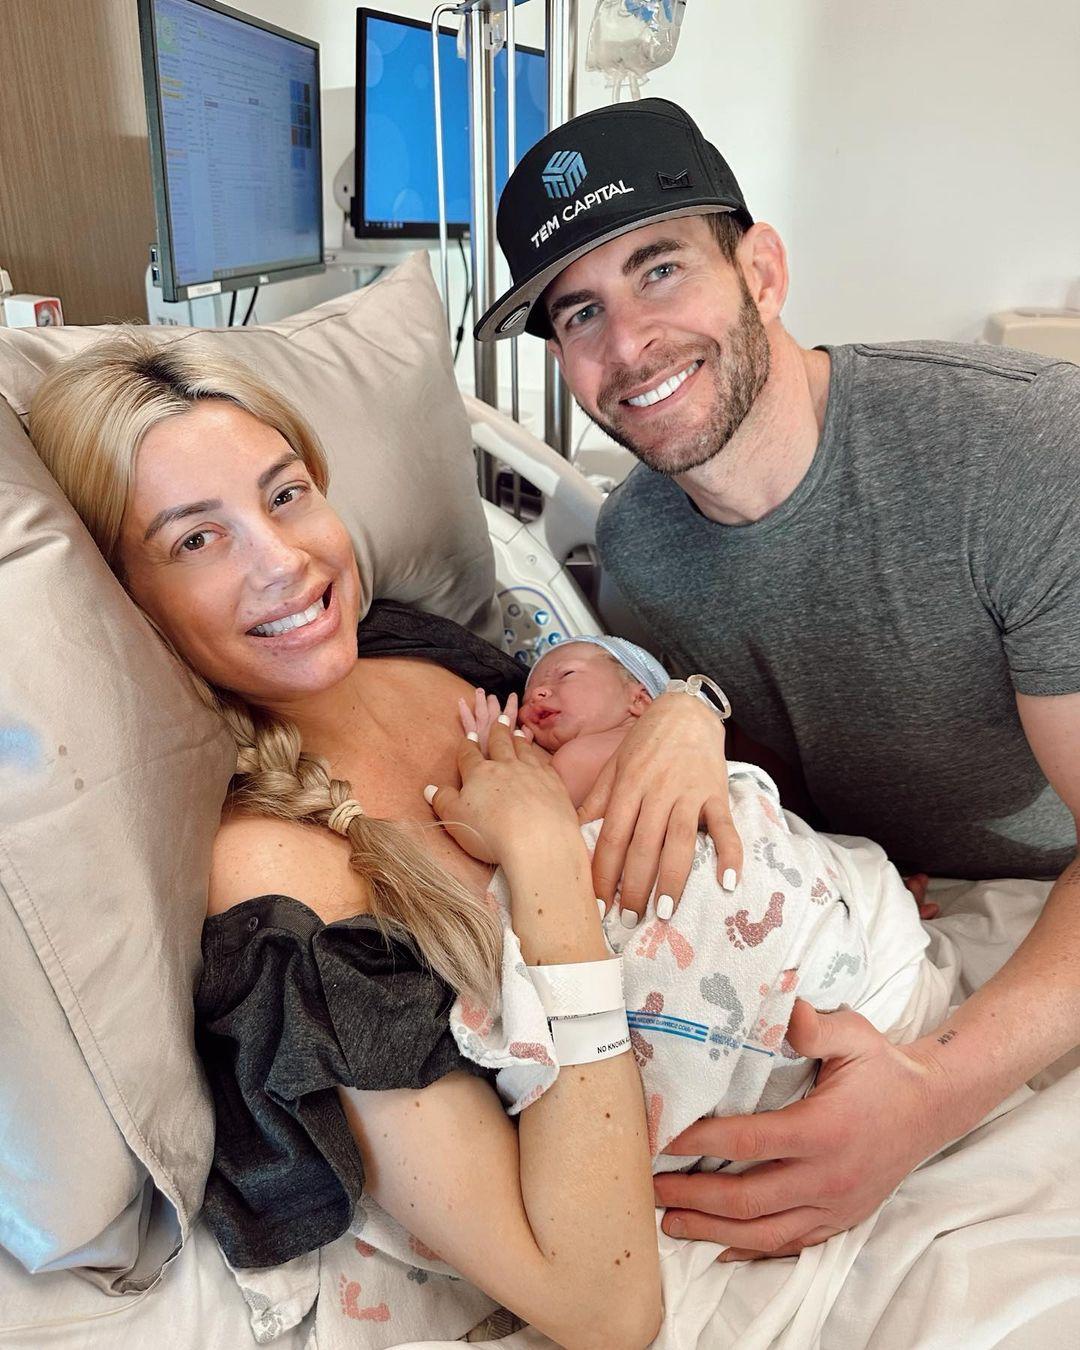 Tarek El Moussa Declares 'Dad Life Is 100% The Life For Me' With THESE Cute Snaps